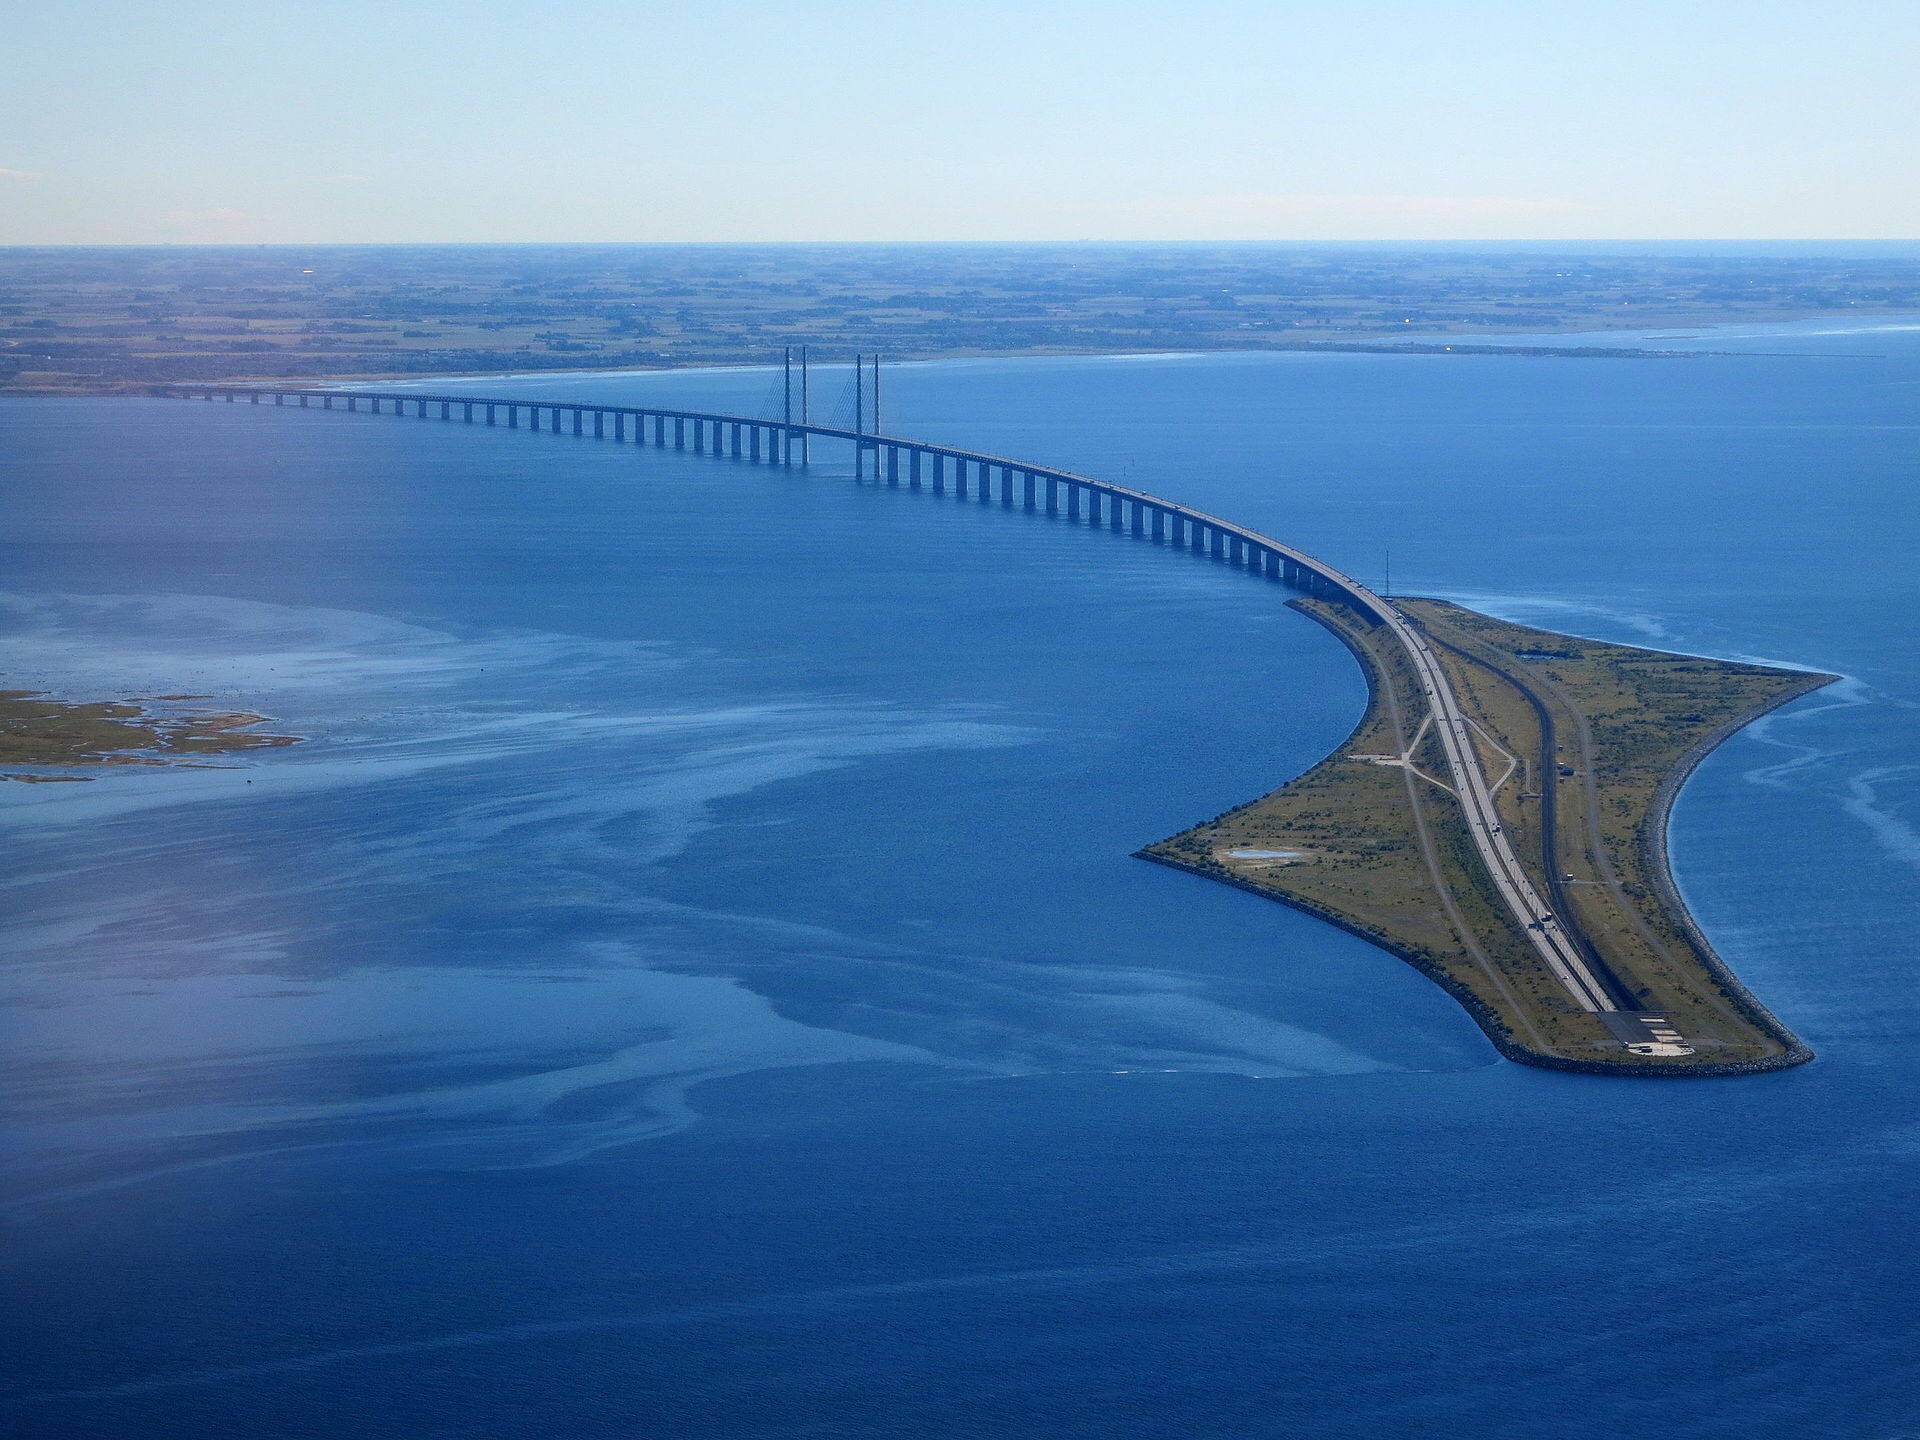 The Øresund Bridge that connects Sweden to Denmark and dives into the sea